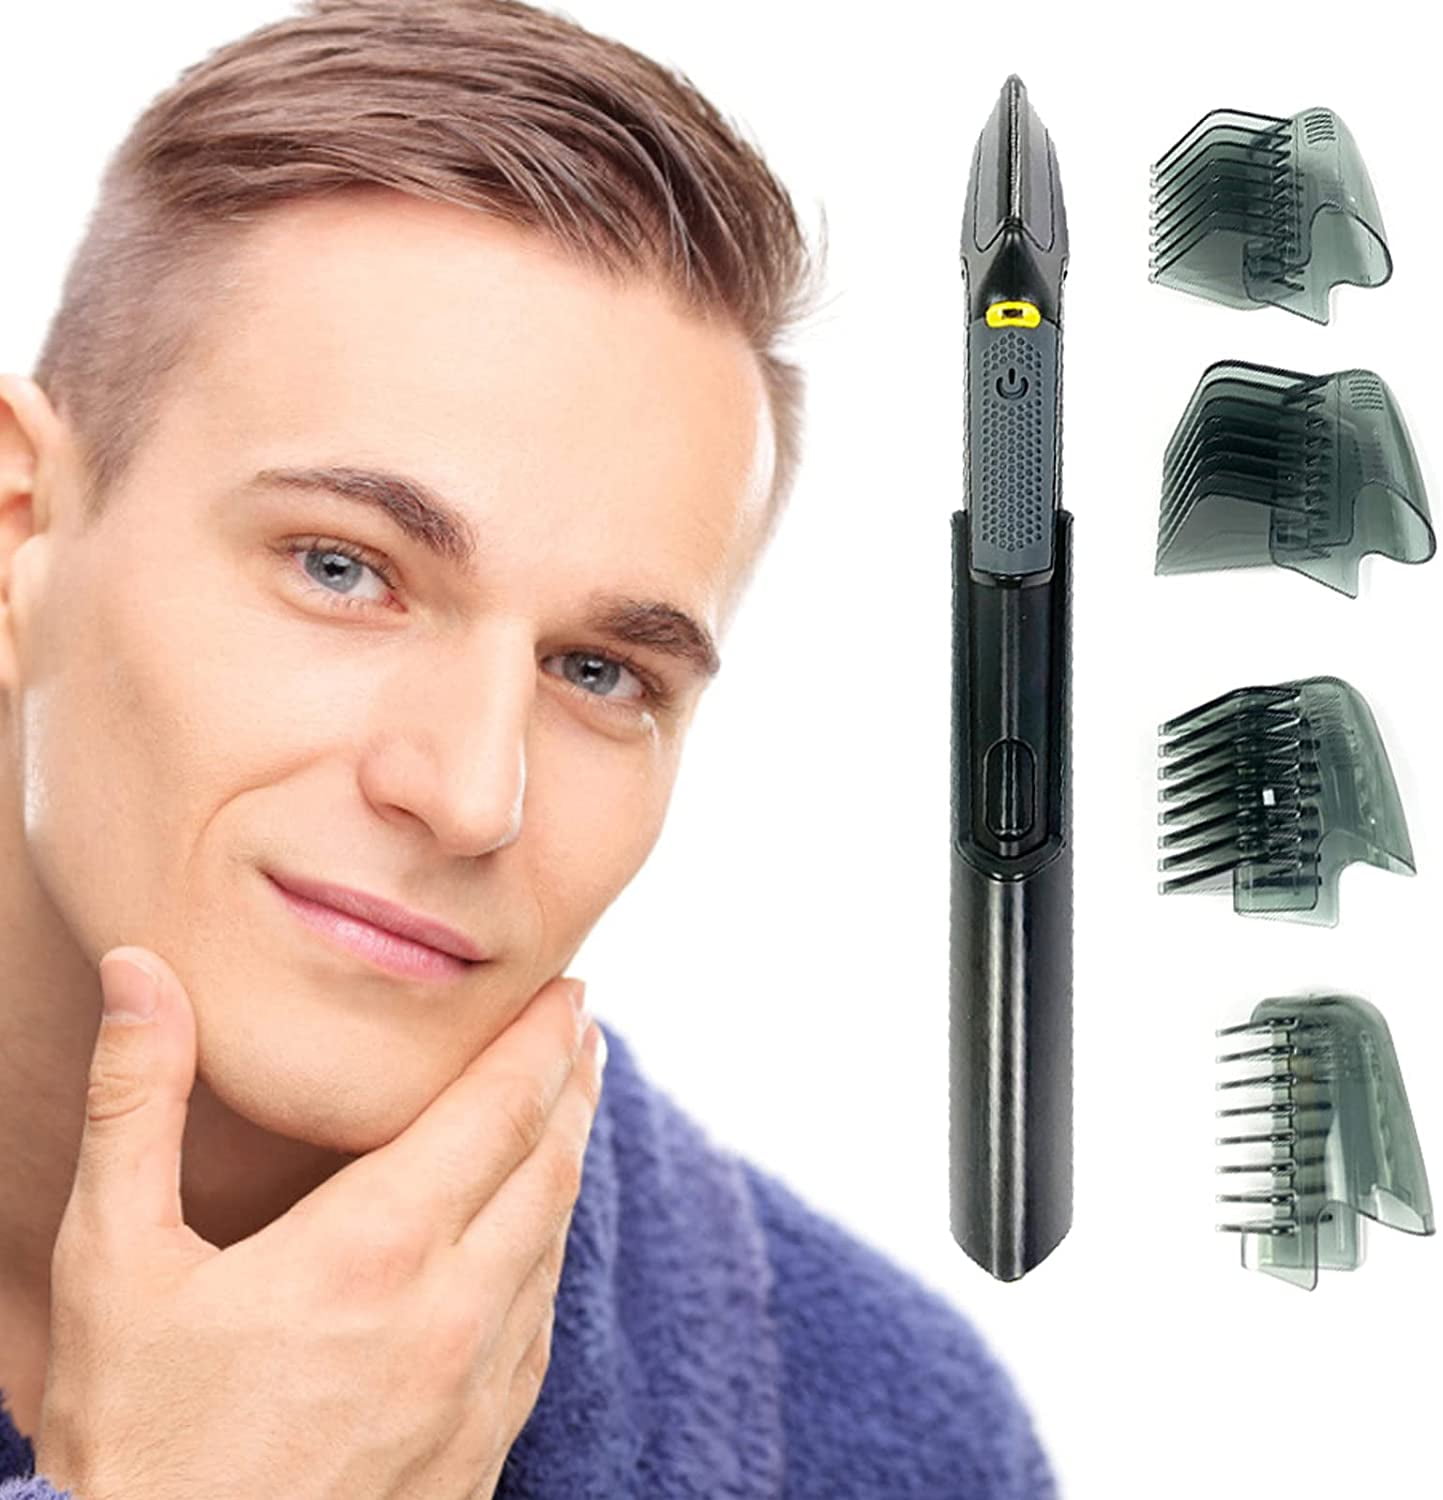 Buy Titanium Trim Hair Cutting Tool, Body Shaver and Groomer, Body Hair  Trimmer for Men, Cordless Waterproof Design, Home Haircut with 4 Comb  Attachments Beard Trimmer Online at Lowest Price in Ubuy